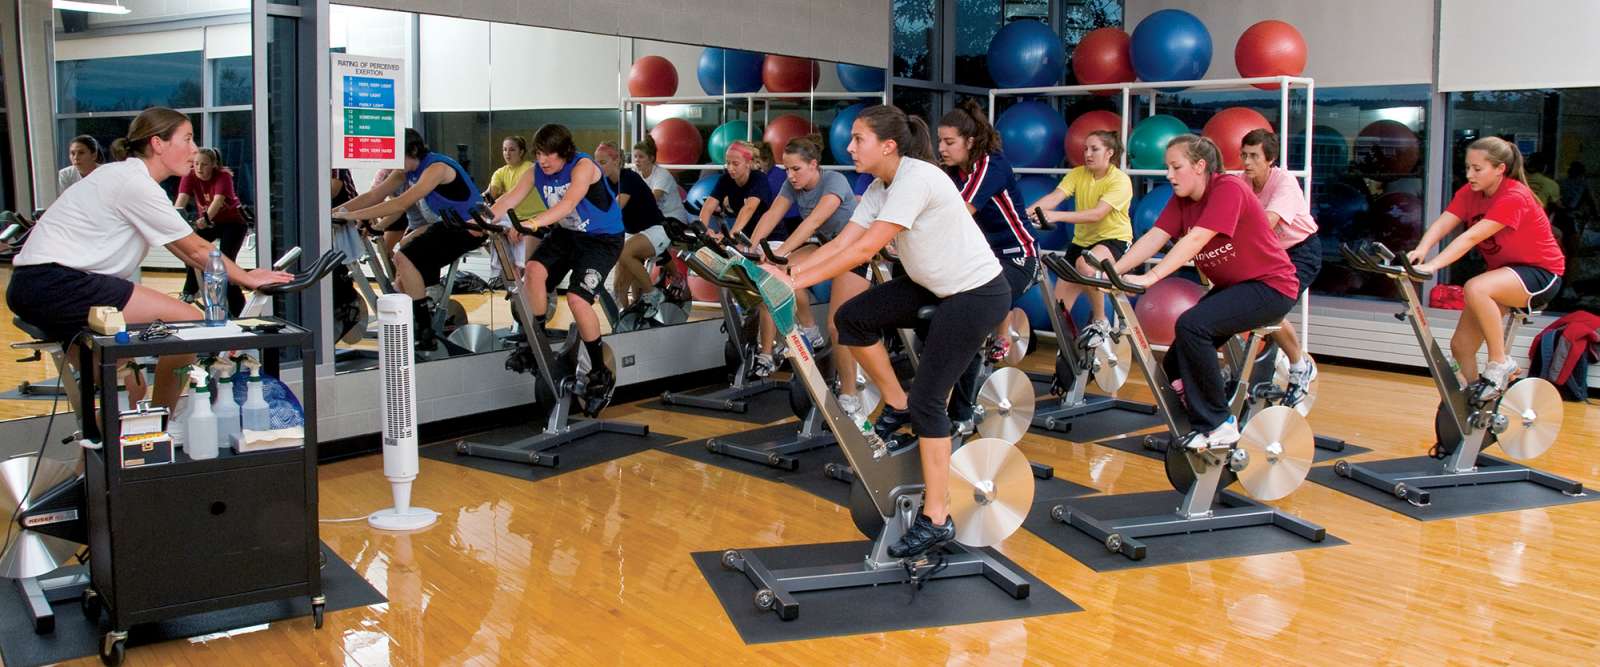 Group Fitness Classes · Student Life · Keene State College